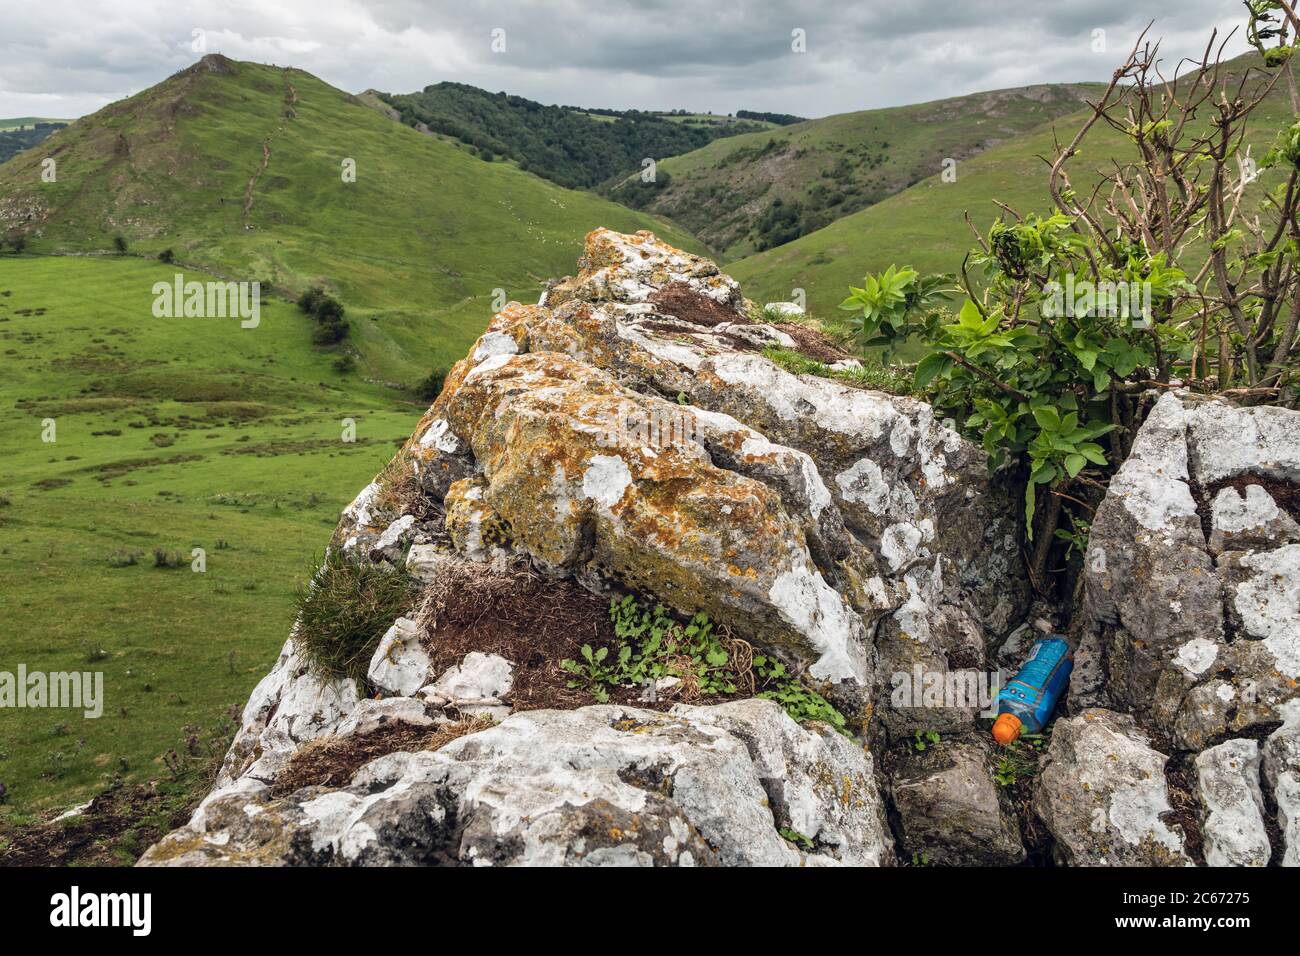 An empty plastic drink bottle discarded on Hamston Hill, Dovedale, Peak District NationalPark, Derbyshire Stock Photo